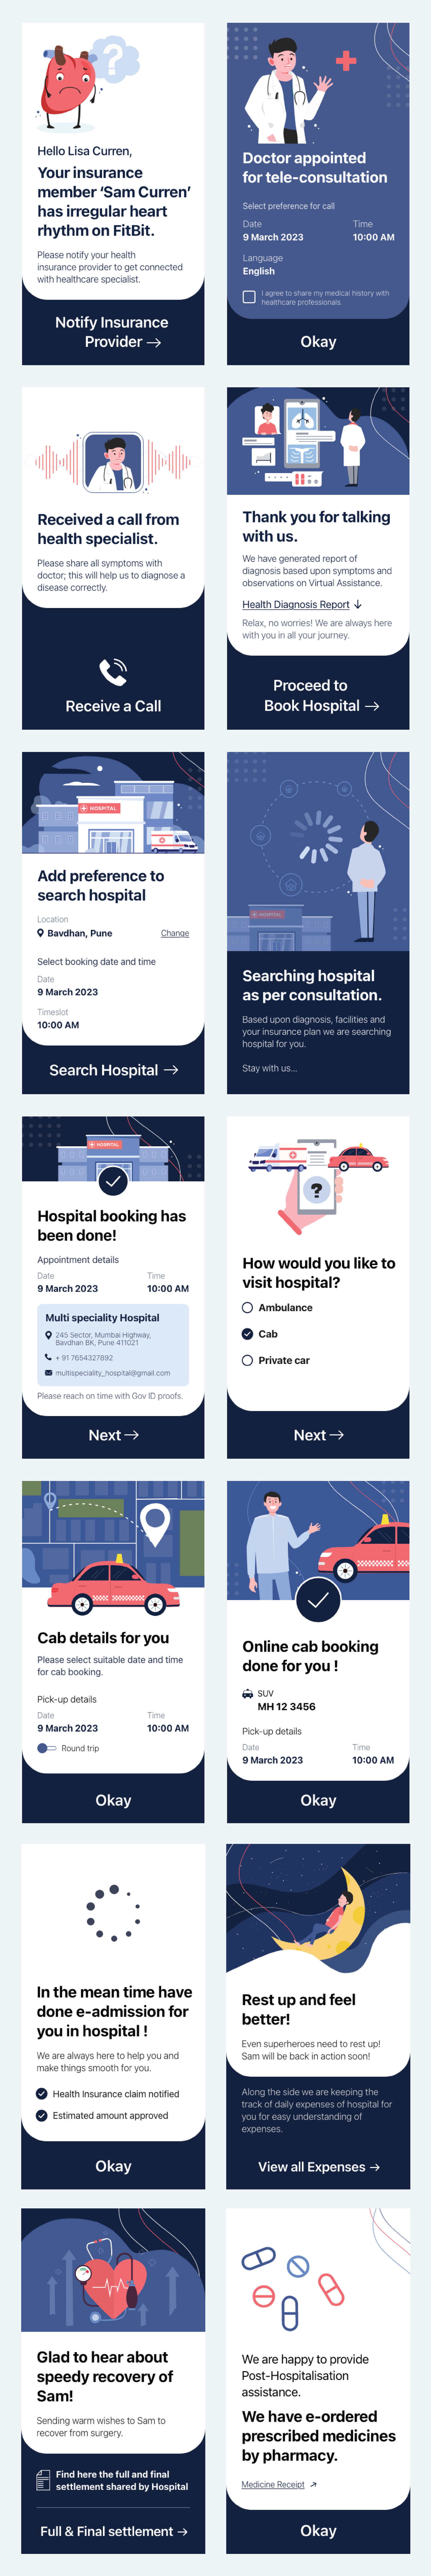 A series of images showing an insurance journey. It starts with notifying the insurer, moving through taking the call, identifying a medical provider,  organizing a consultation, arranging transport, through to being seen and collecting prescriptions